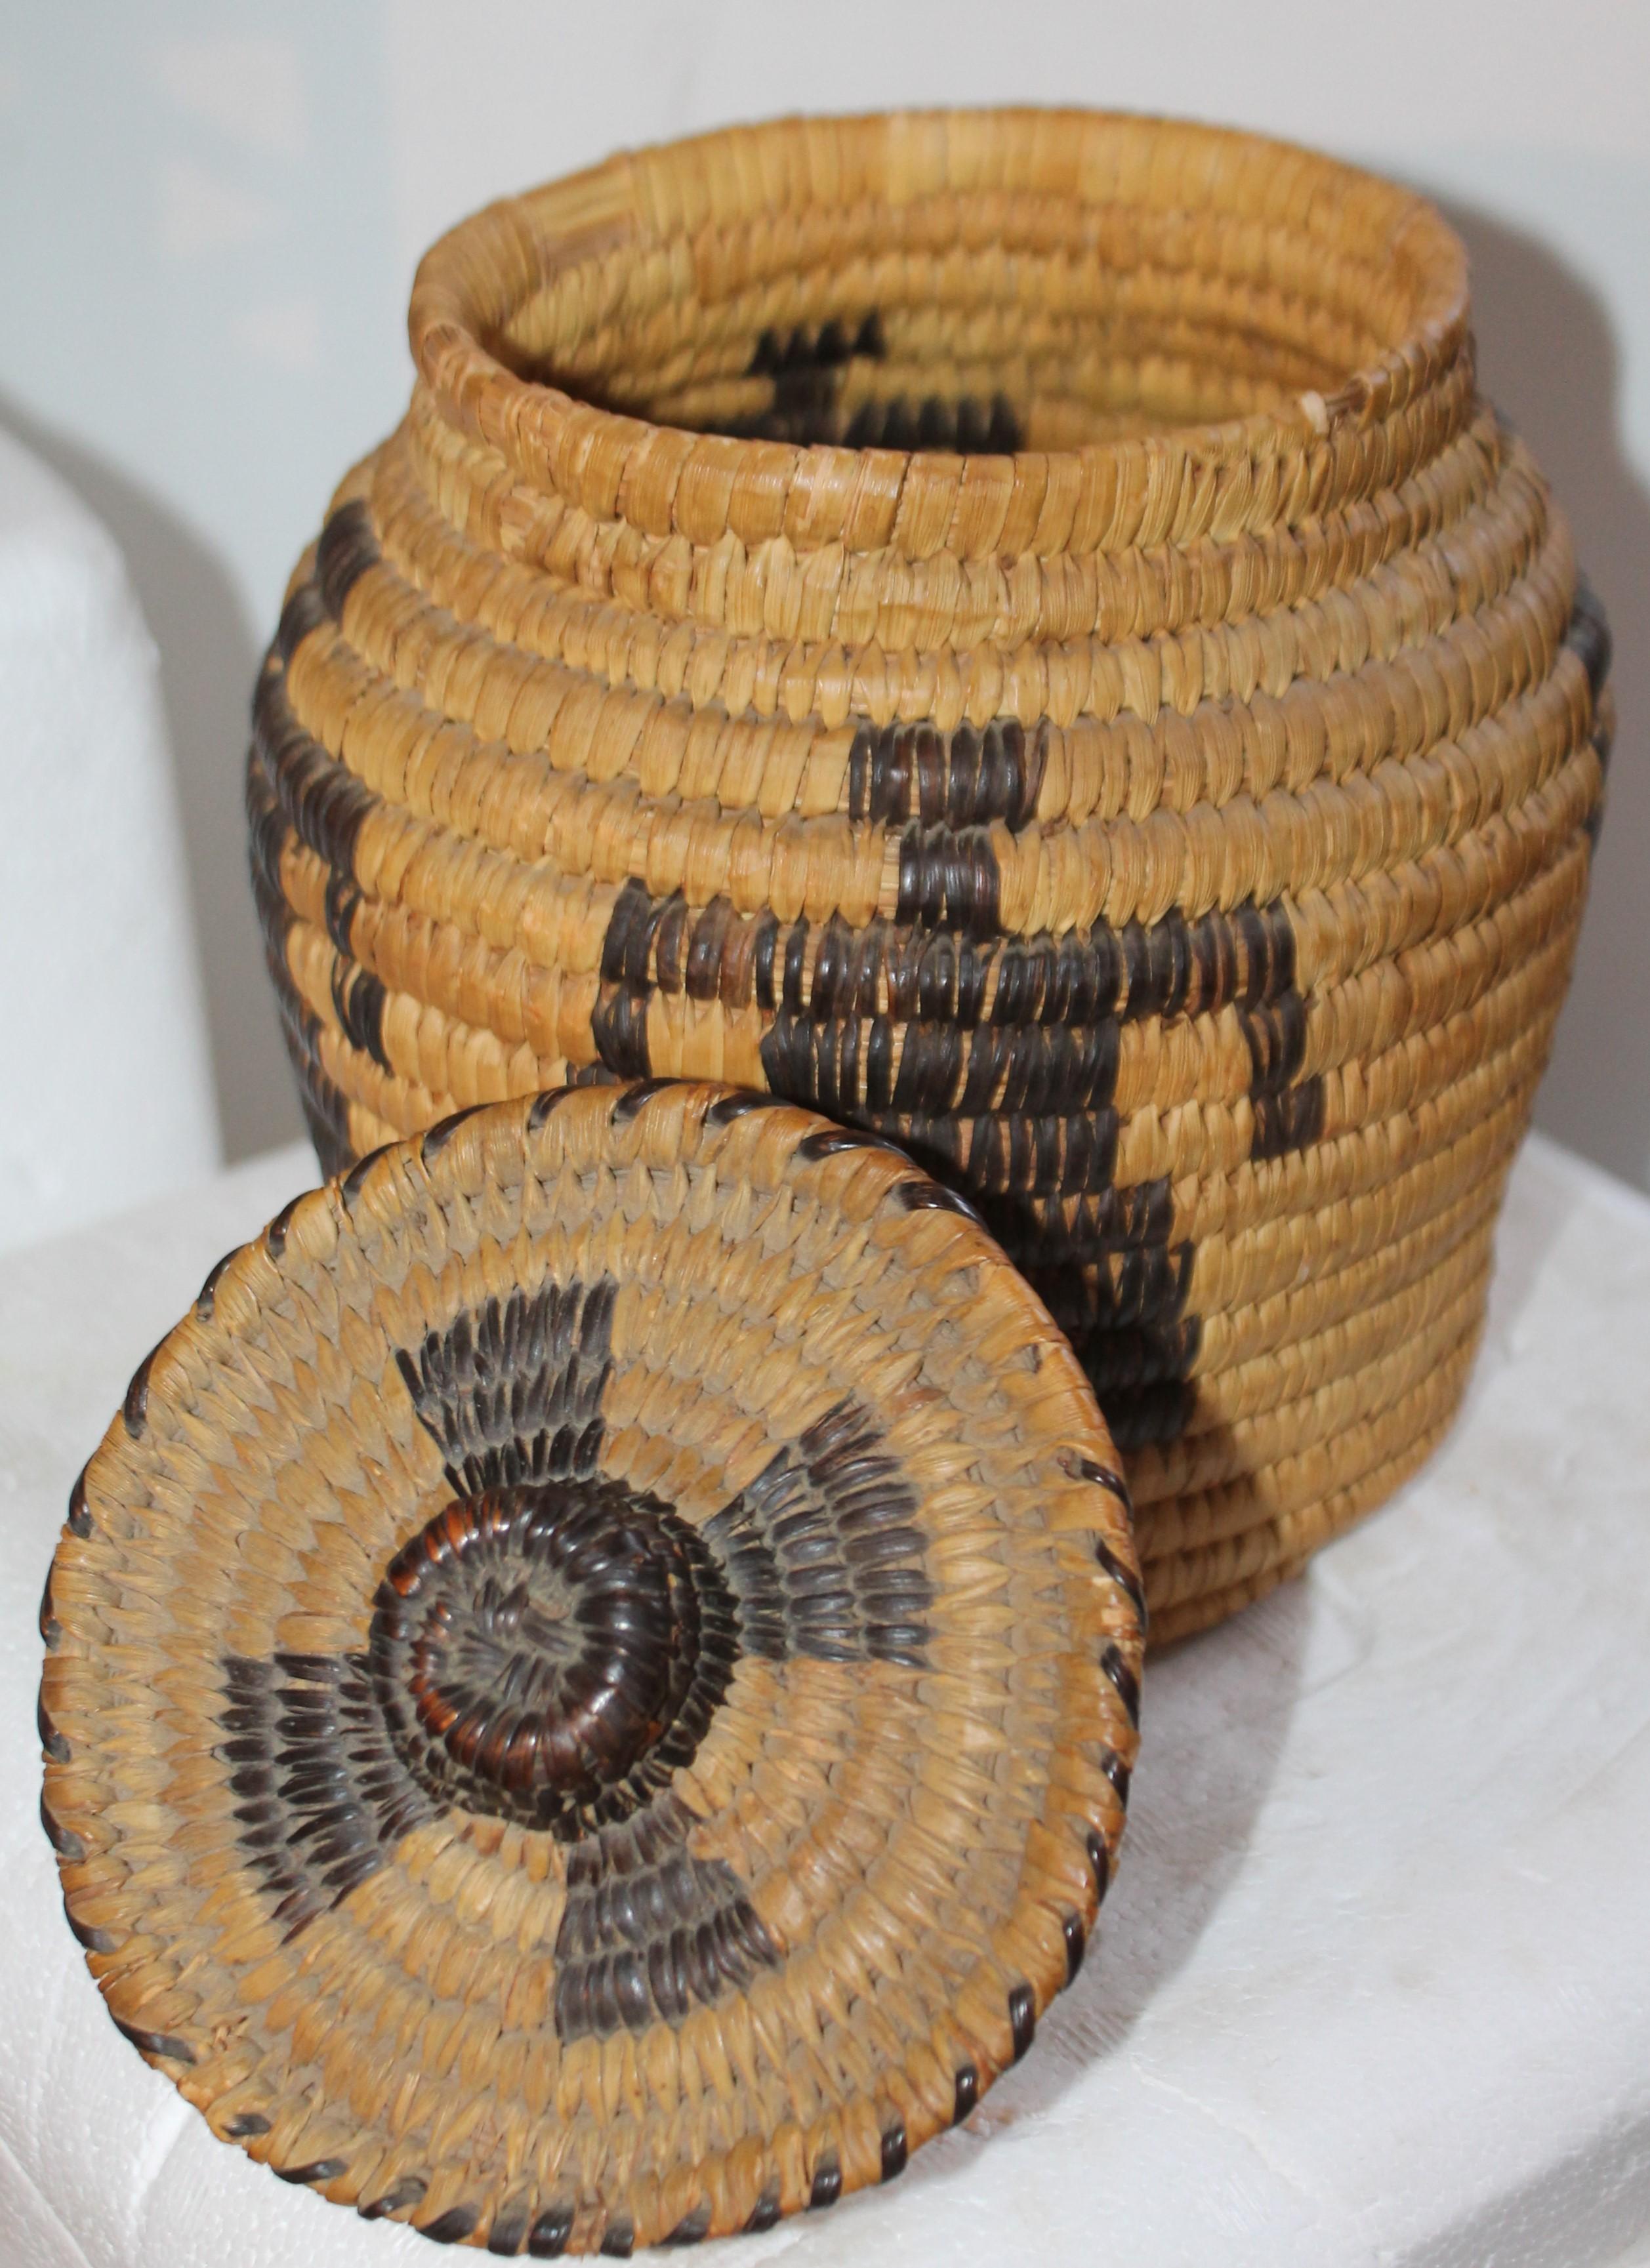 This fine American Indian Papago lidded basket in good condition and quite unusual dancers featured on the basket.